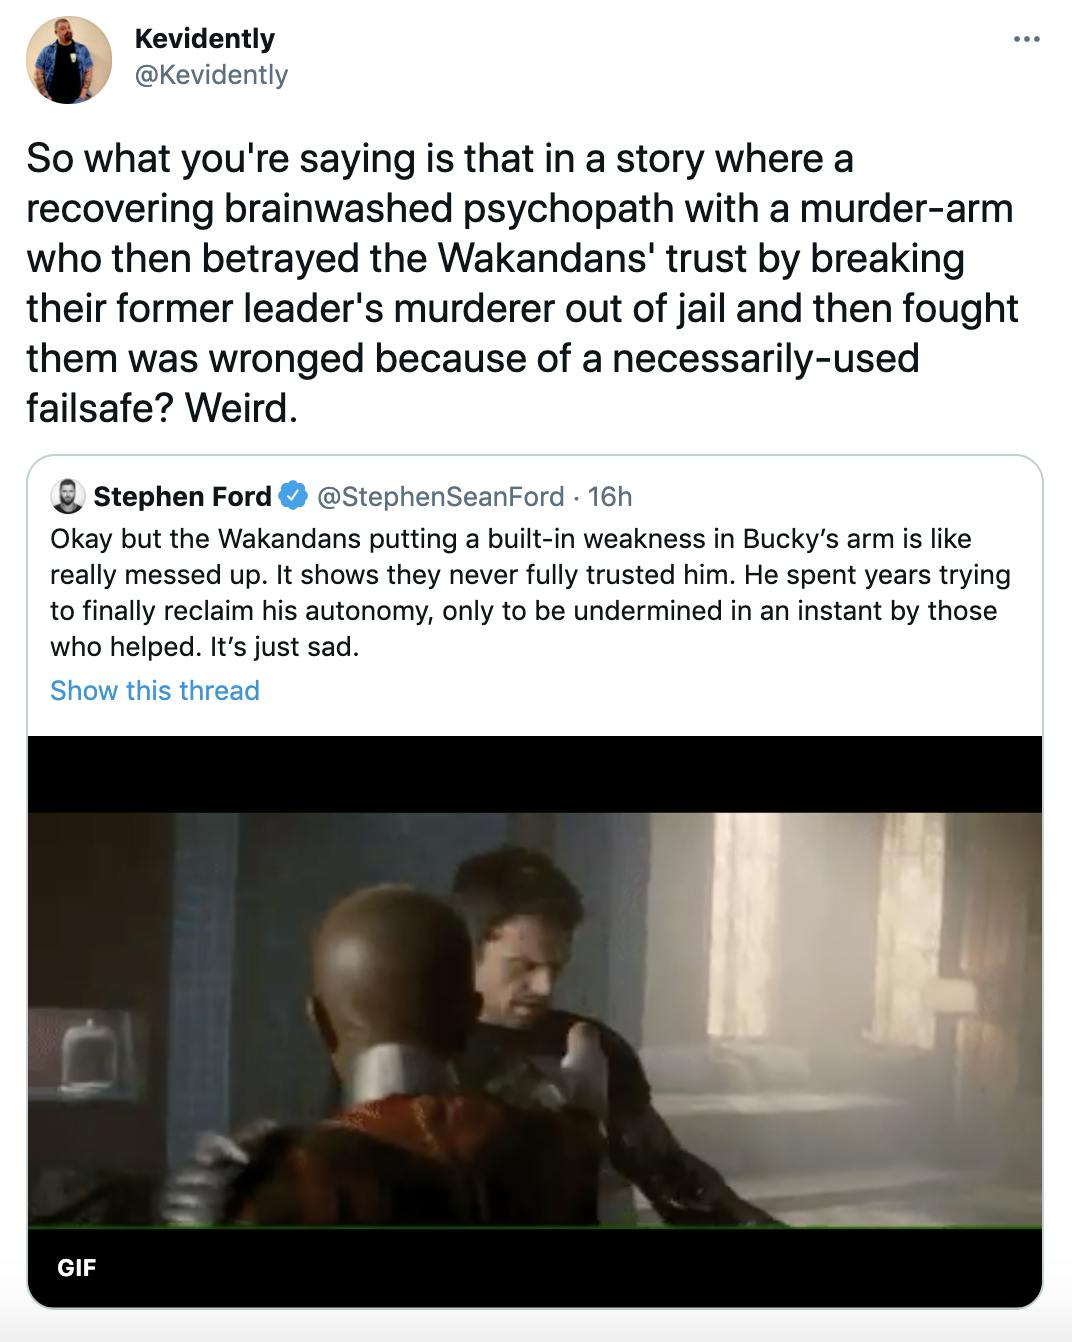 So what you're saying is that in a story where a recovering brainwashed psychopath with a murder-arm who then betrayed the Wakandans' trust by breaking their former leader's murderer out of jail and then fought them was wronged because of a necessarily-used failsafe? Weird.